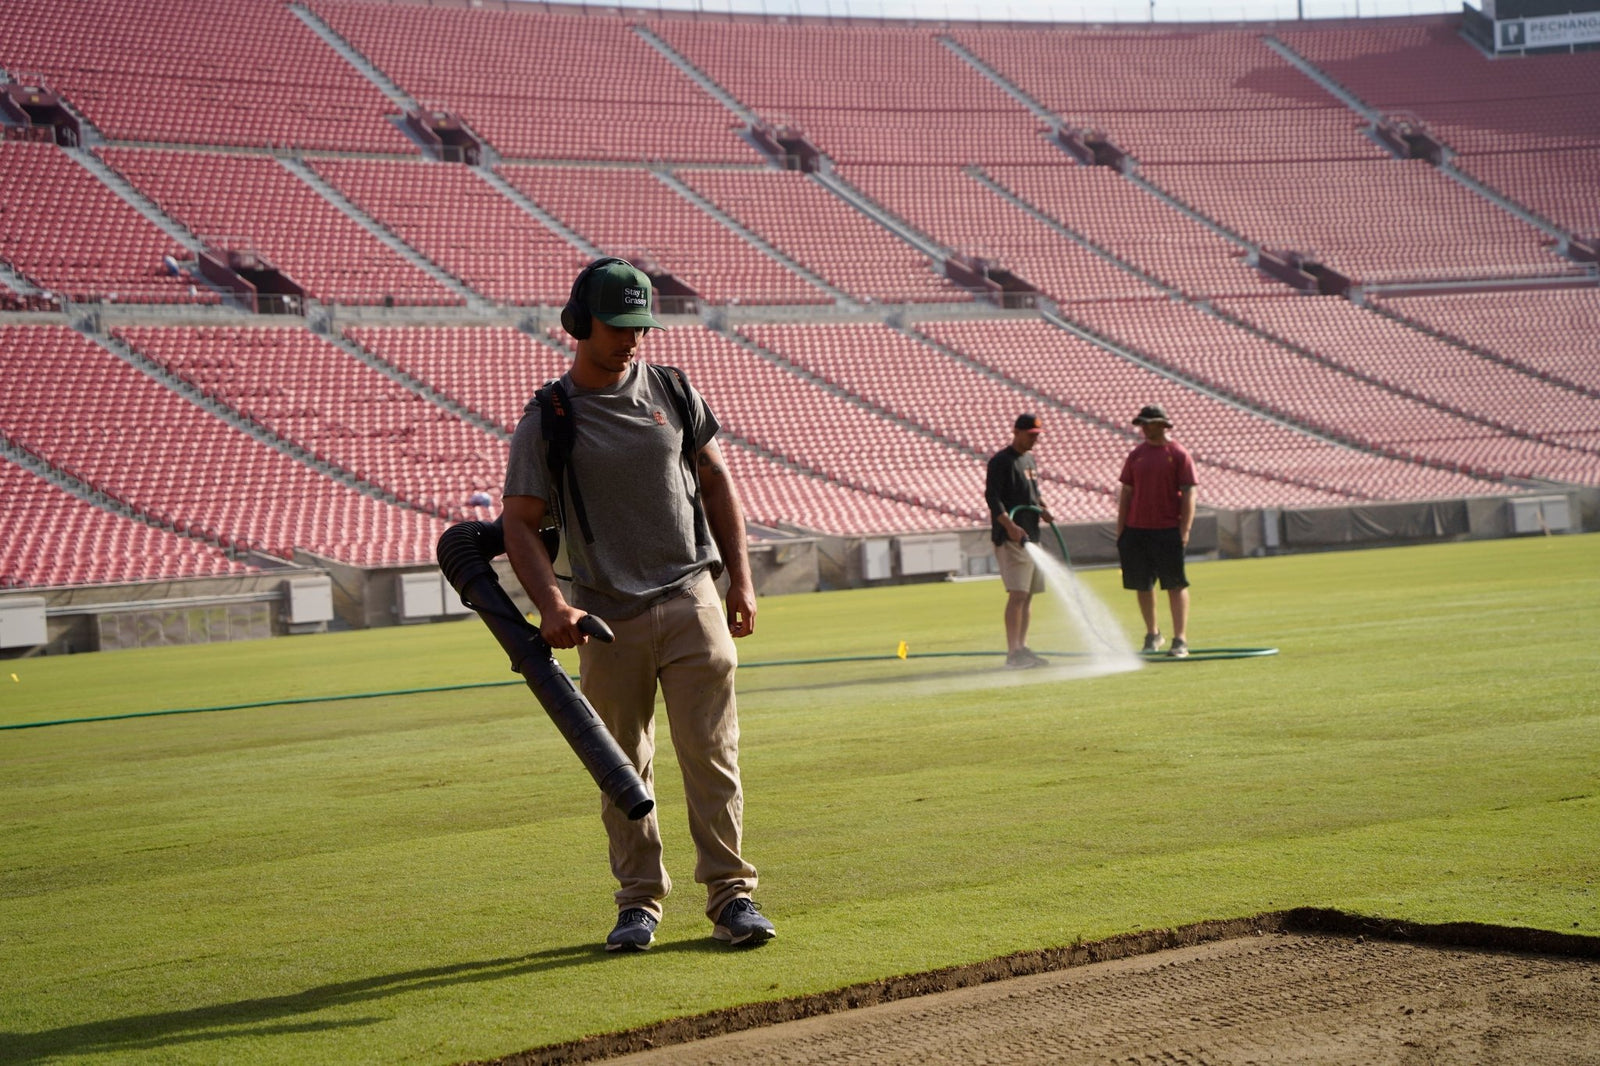 USC Football - Keepers of the Turf - Grass Clippings